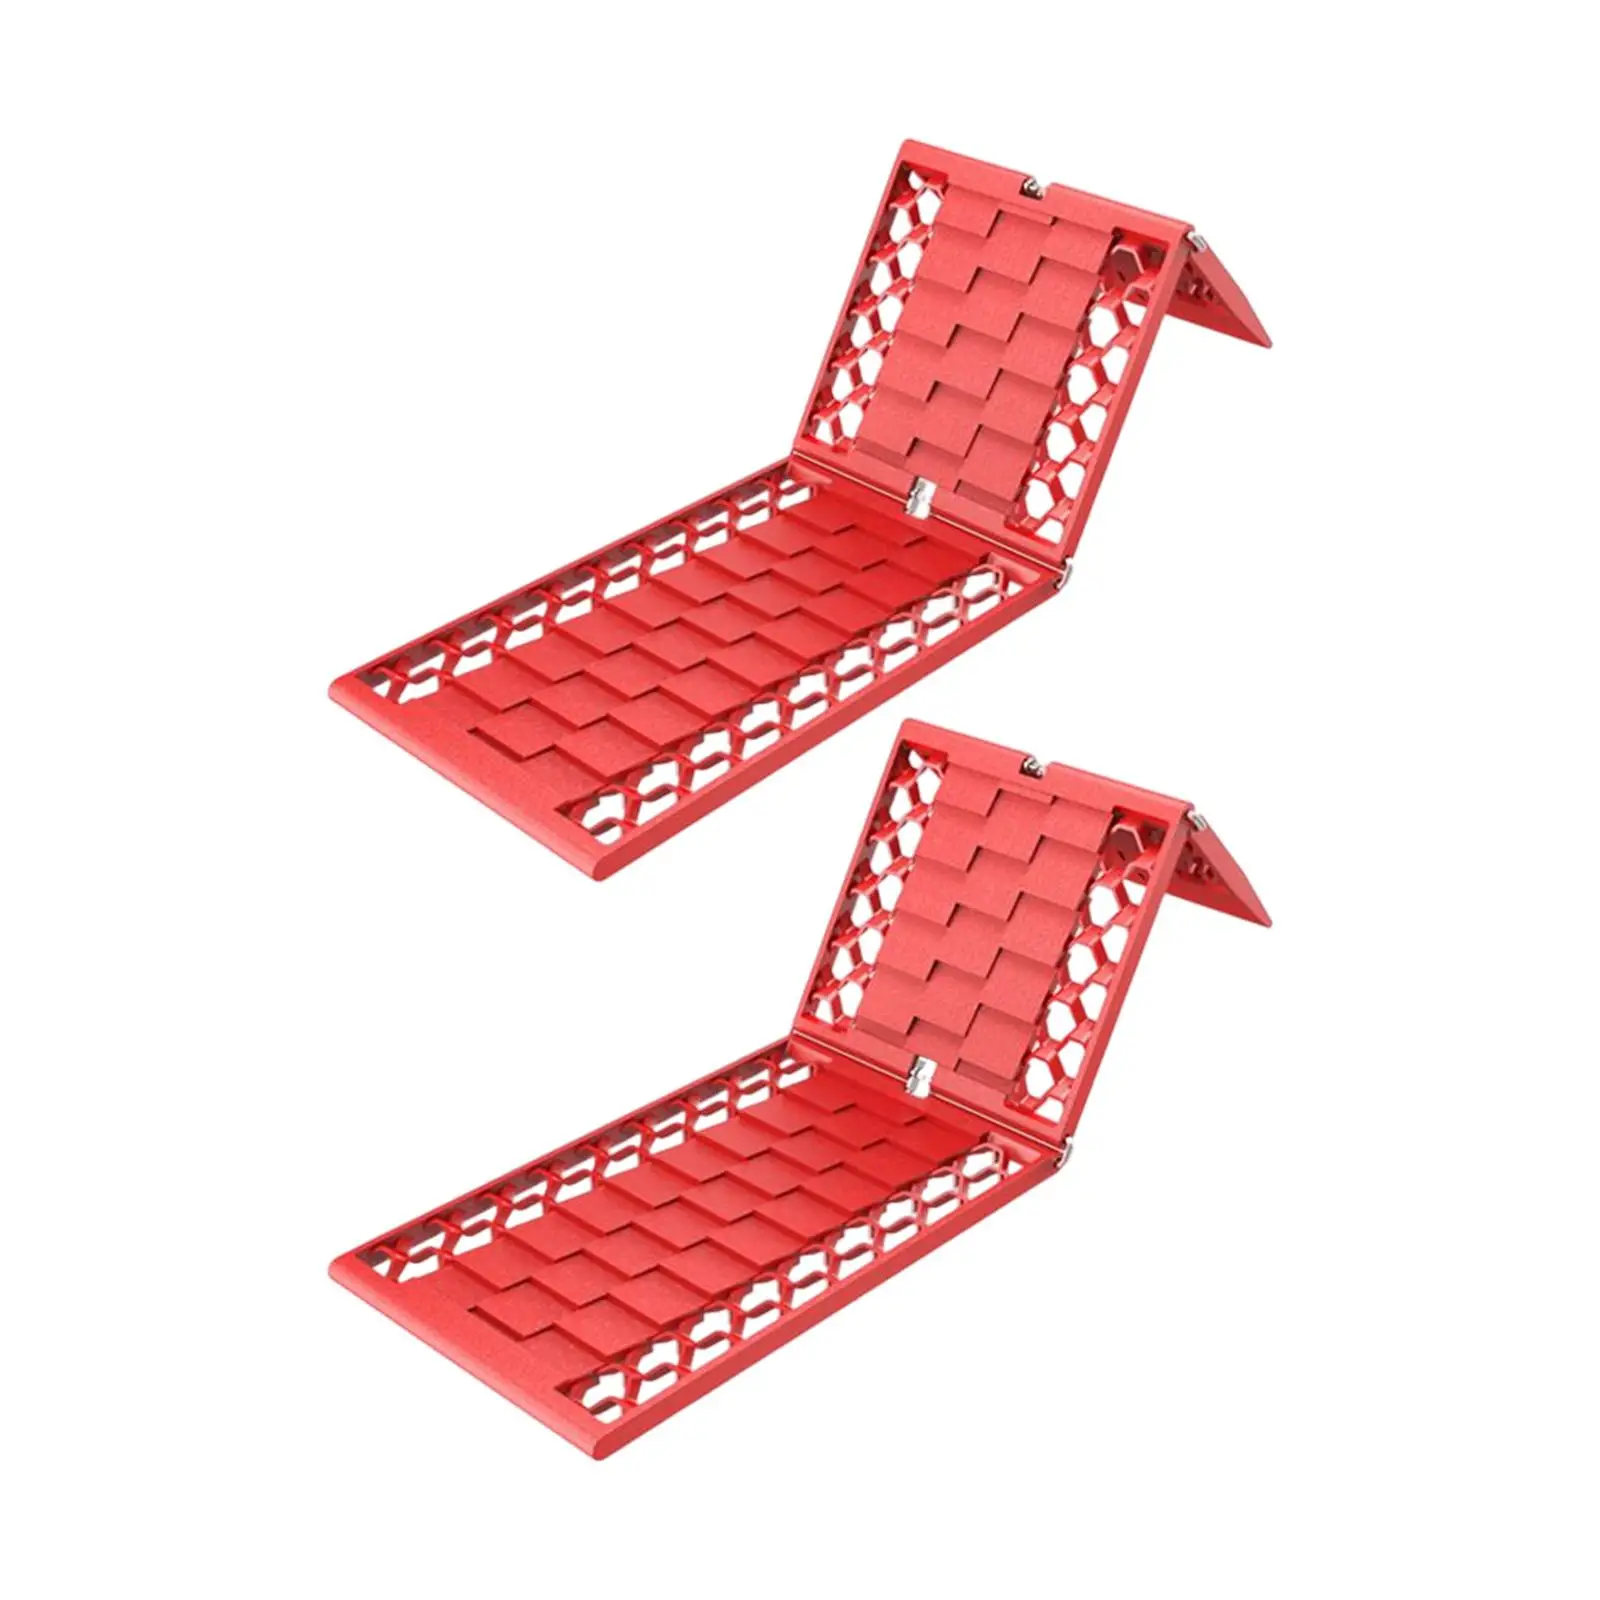 2 Pieces Traction Boards Wheel Tire Ladder for Mud Sand Automotive